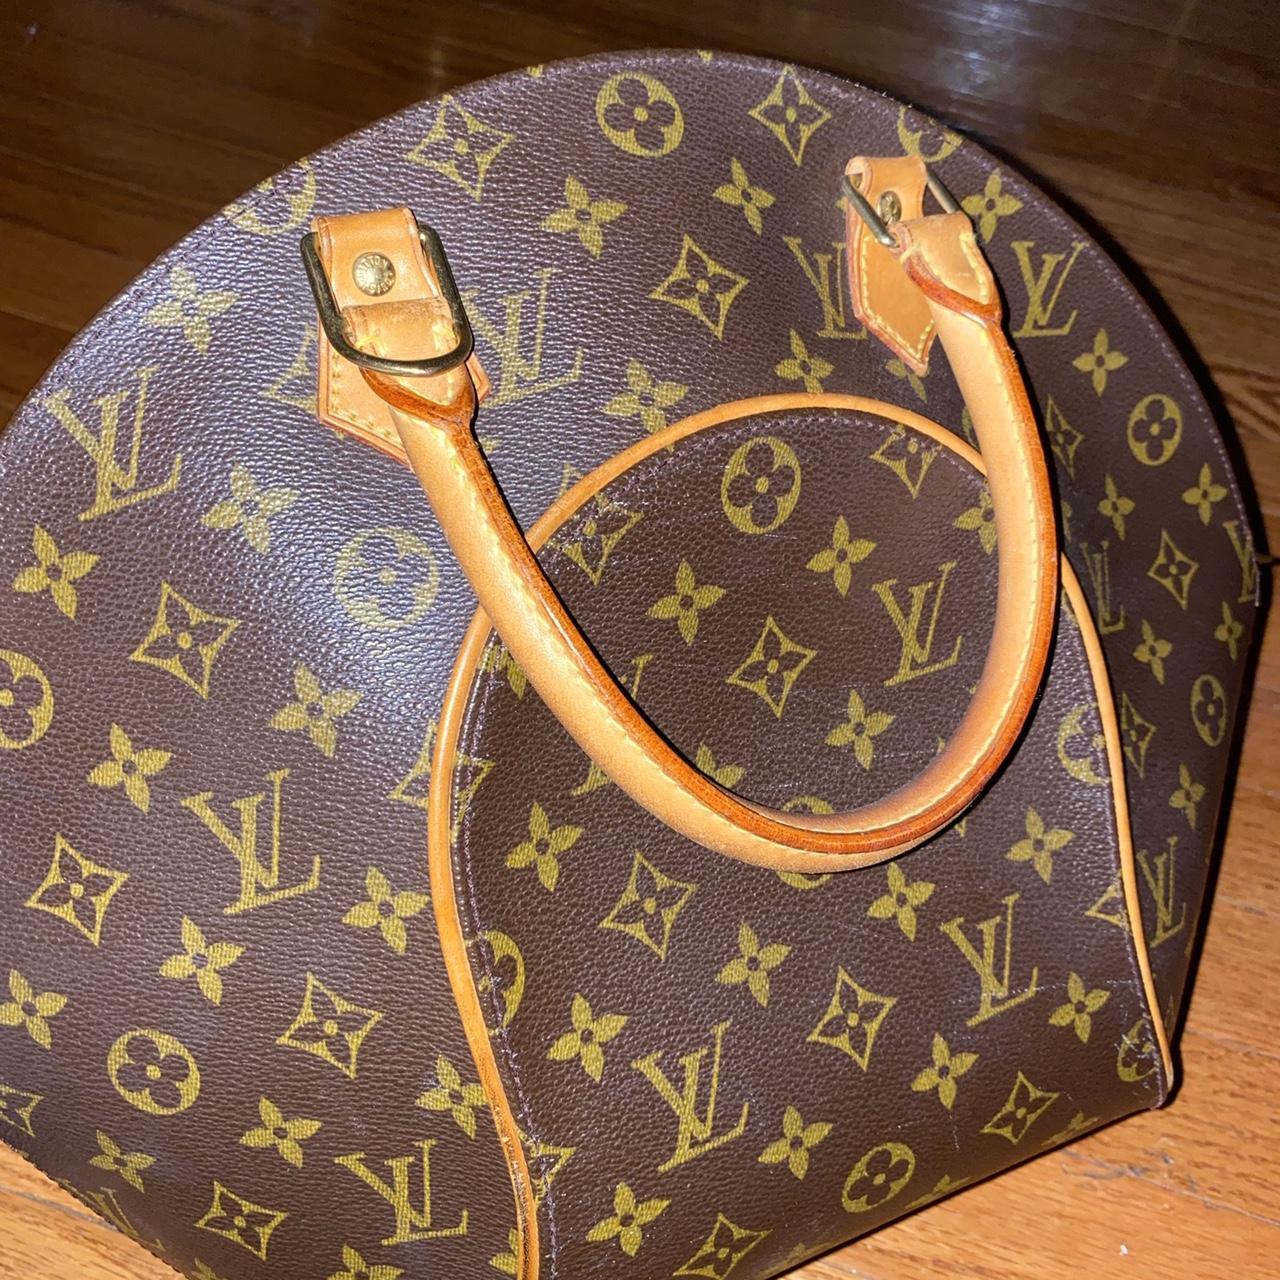 LV Monogram Bag, Bought from Fashionphile. Used- - Depop